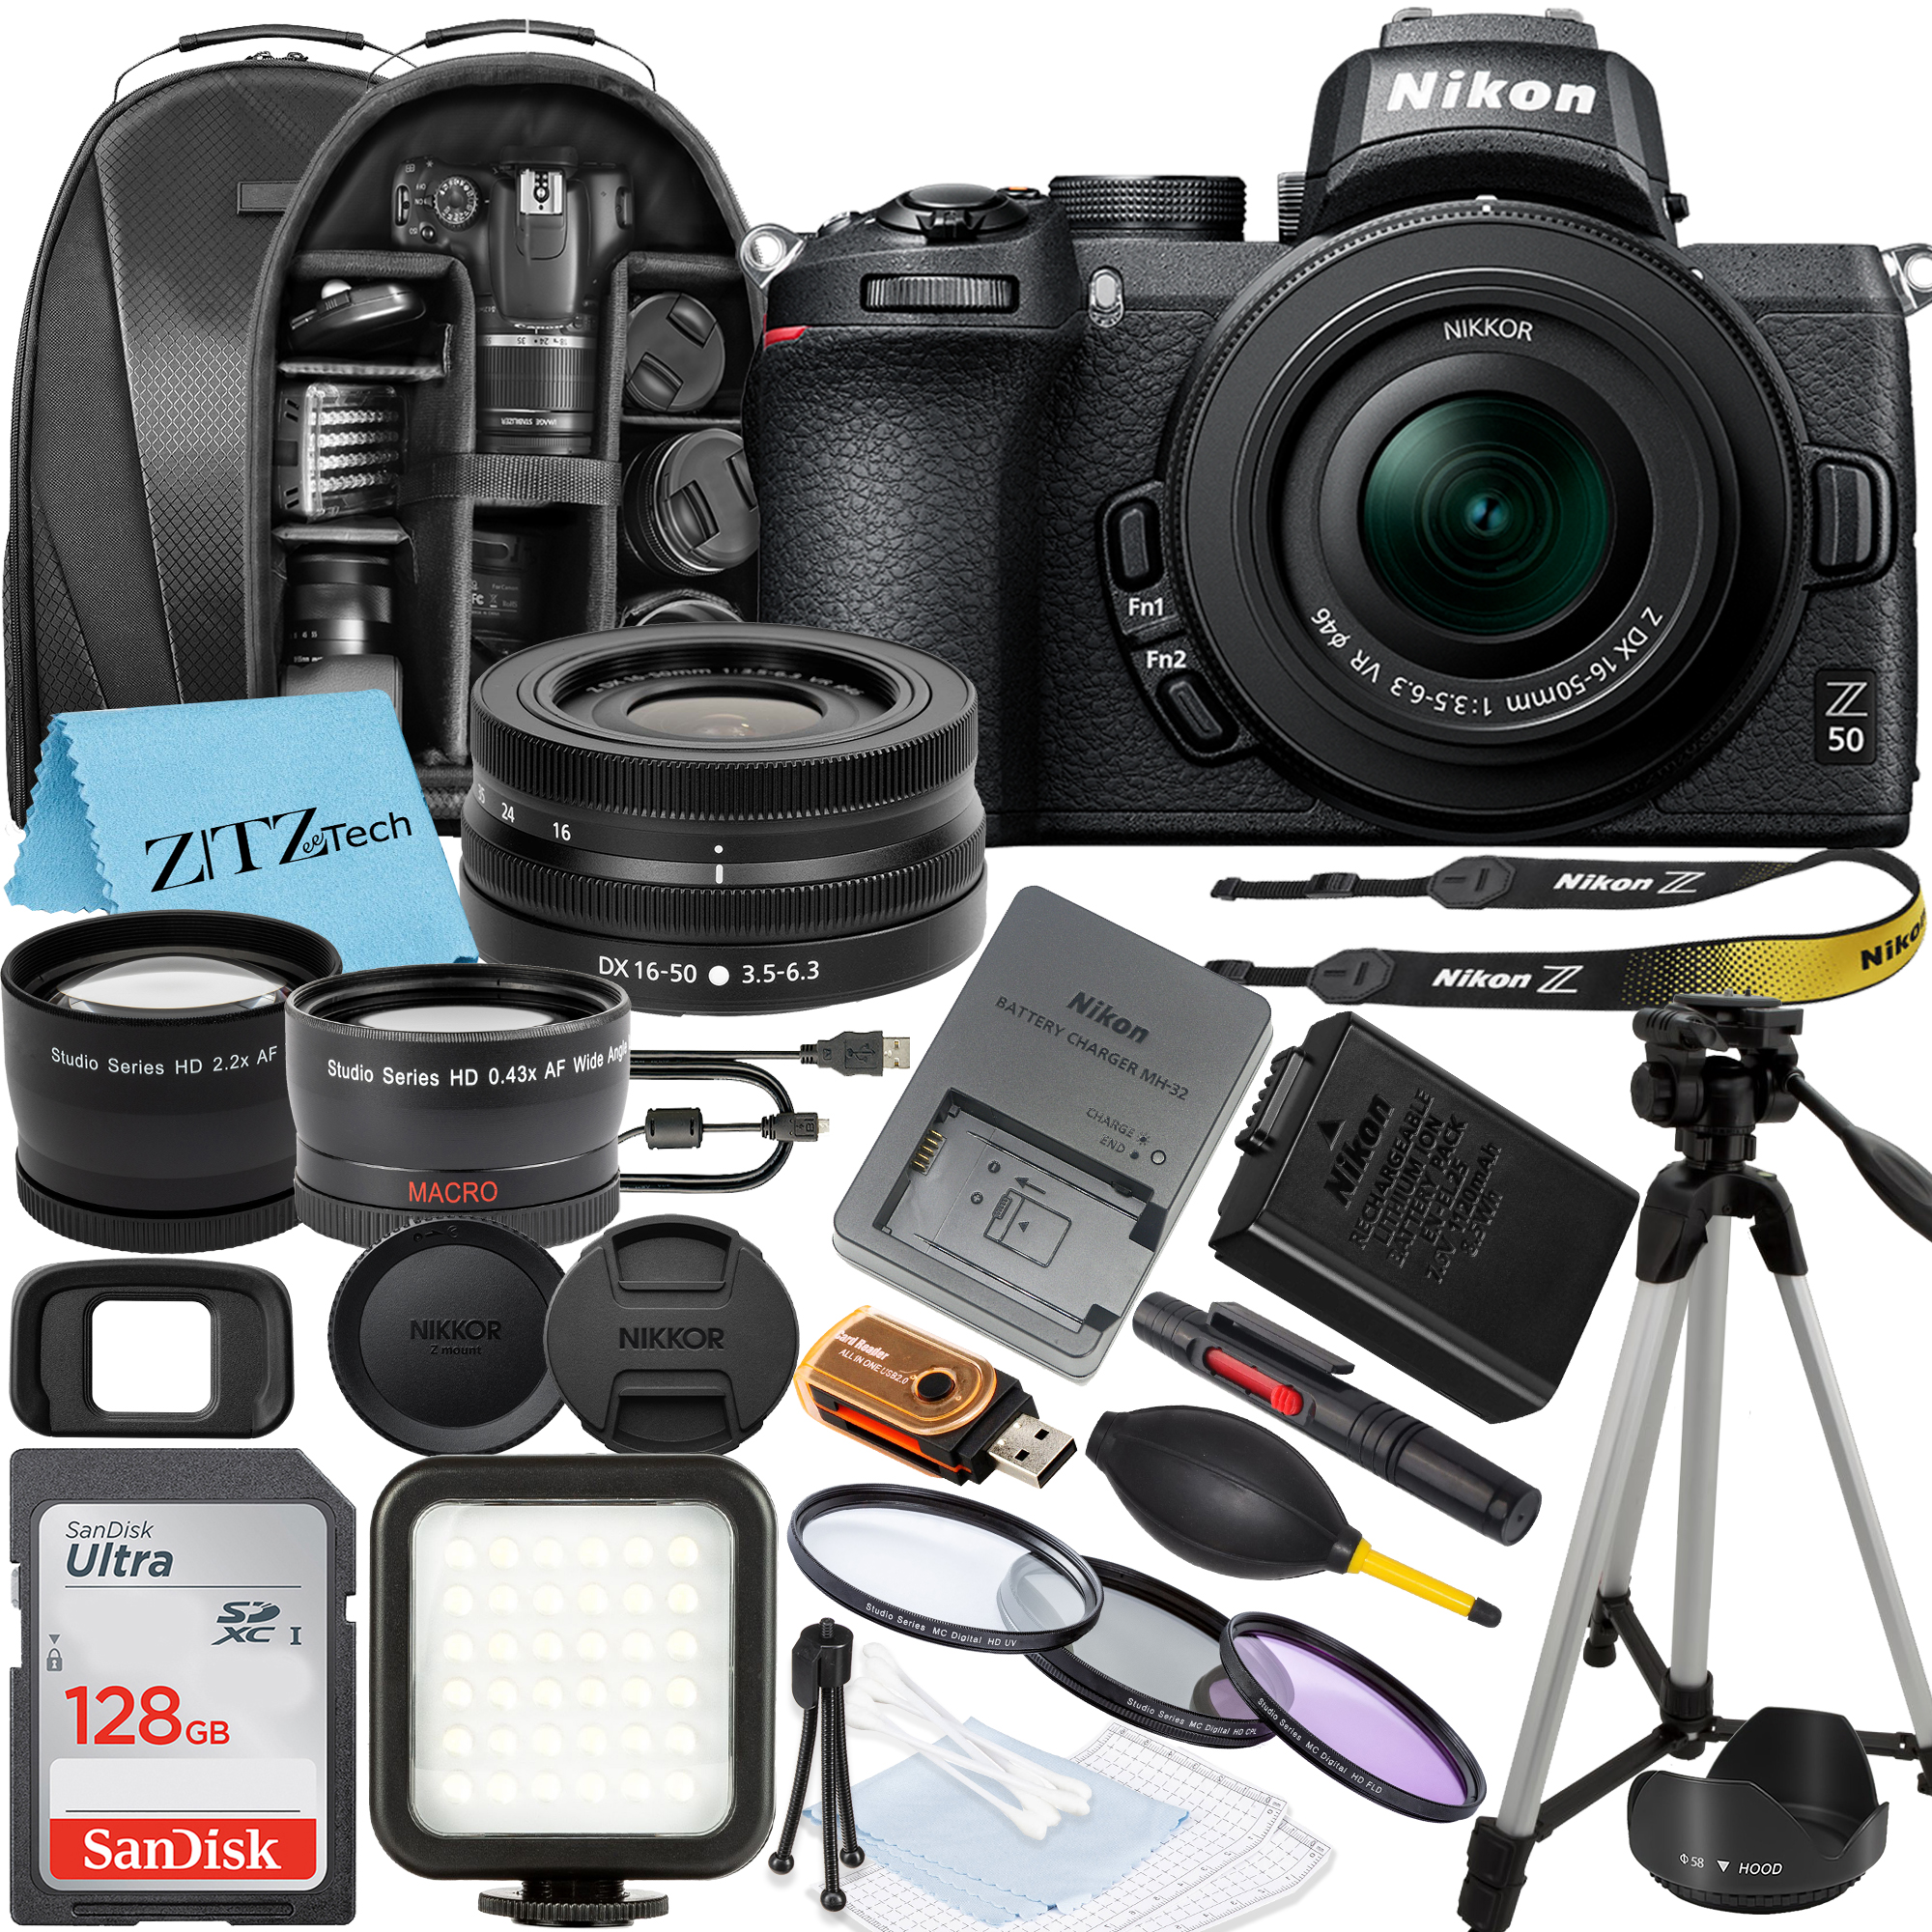 Nikon Z50 Mirrorless Camera with NIKKOR Z DX 16-50mm VR Zoom Lens, SanDisk 128GB Memory Card, Backpack, Flash, Tripod and ZeeTech Accessory Bundle